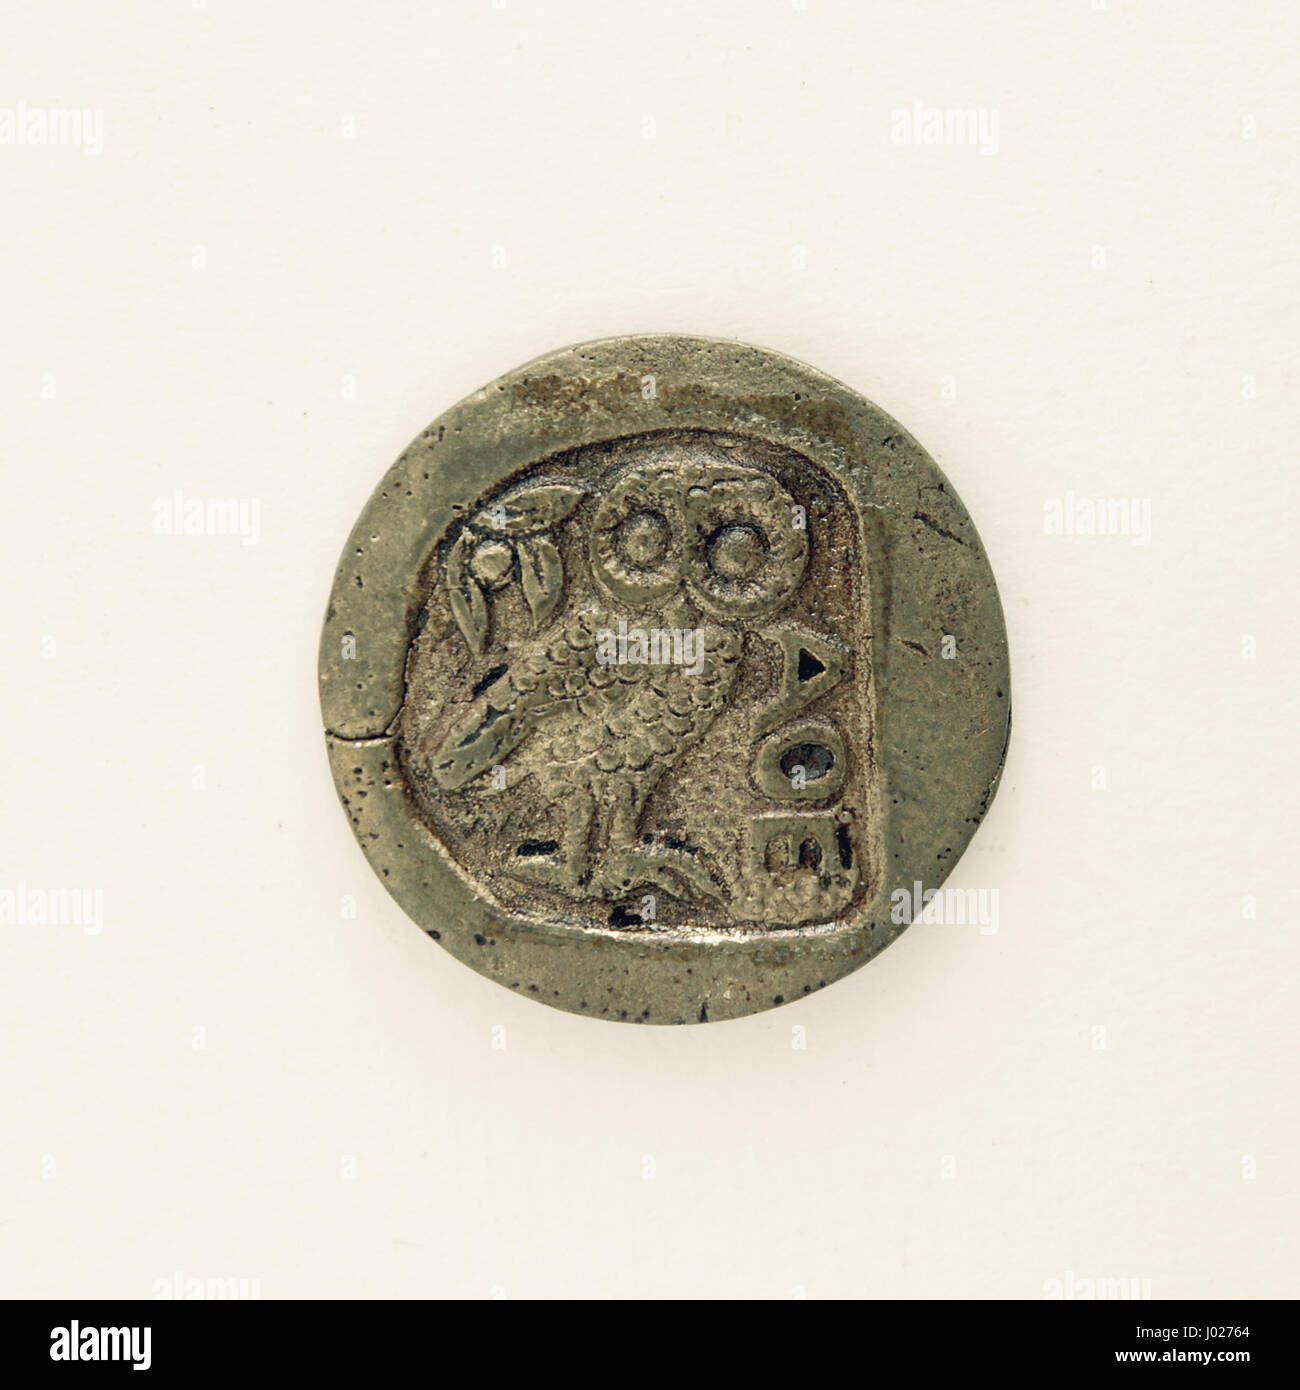 Reverse of Tetradrachm silver coin from after 499 BCE. Owl of Athena and olive branch. Metal copy. Reproduction. Stock Photo